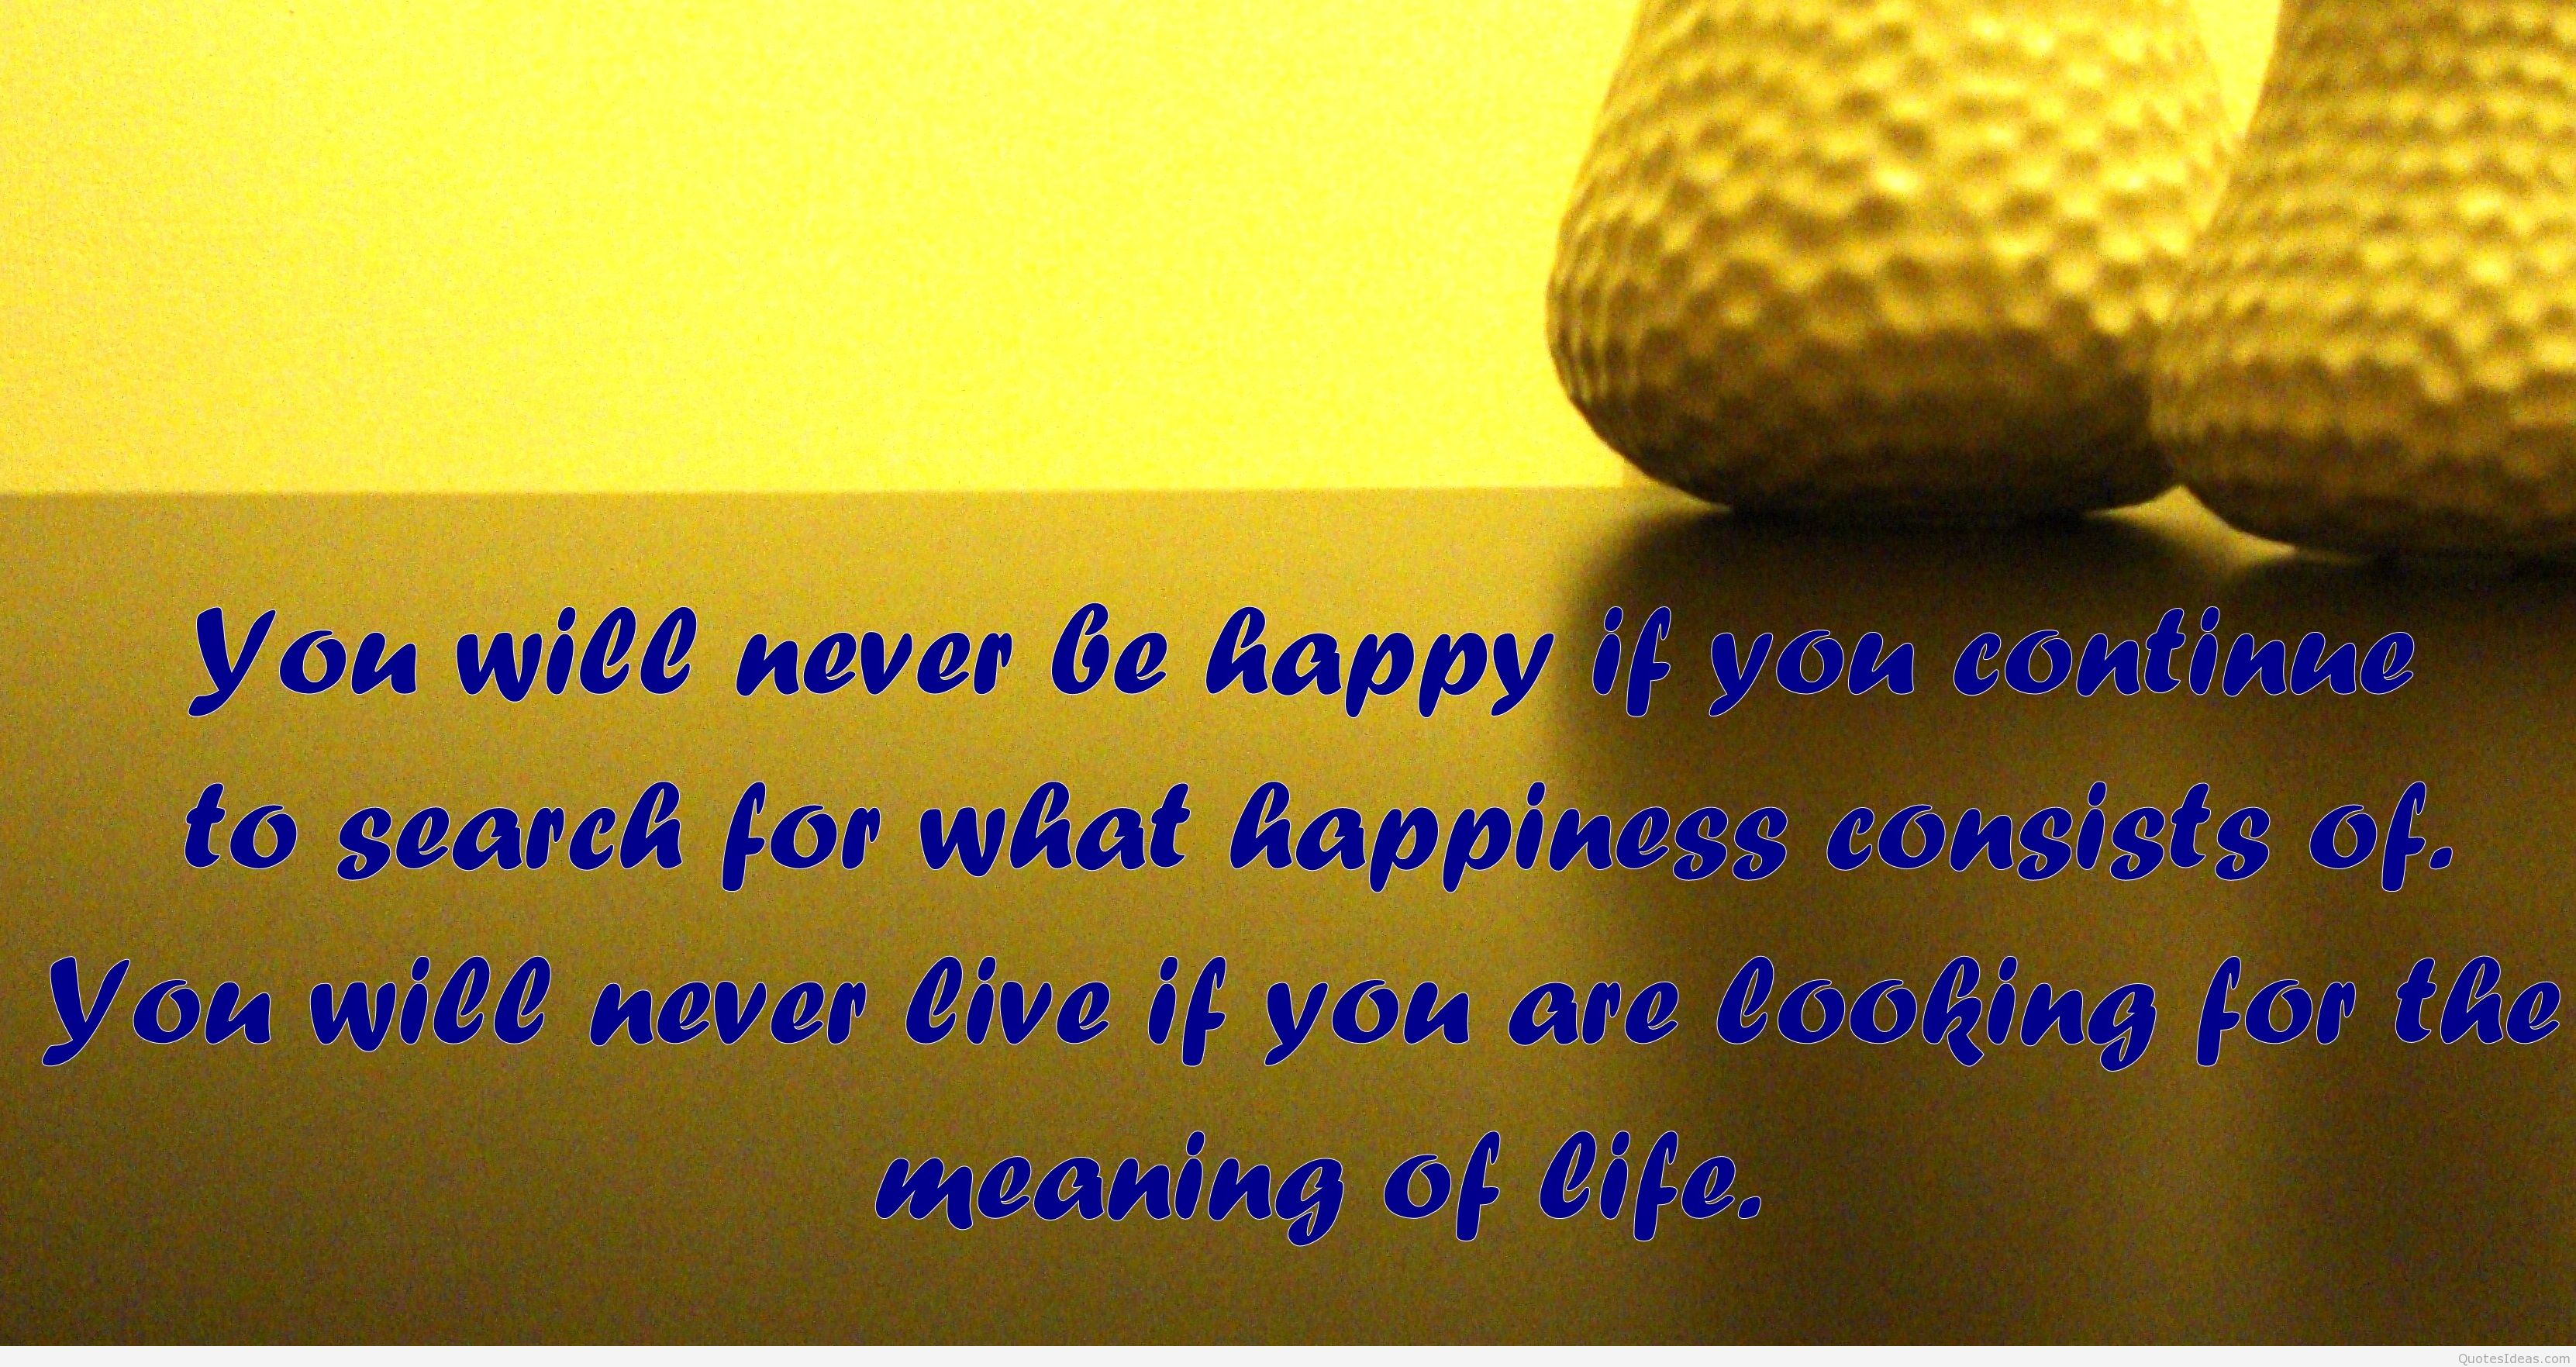 Free Awesome Image Life Quote Hd Wallpaper - Awesome Happy Life Quotes - HD Wallpaper 